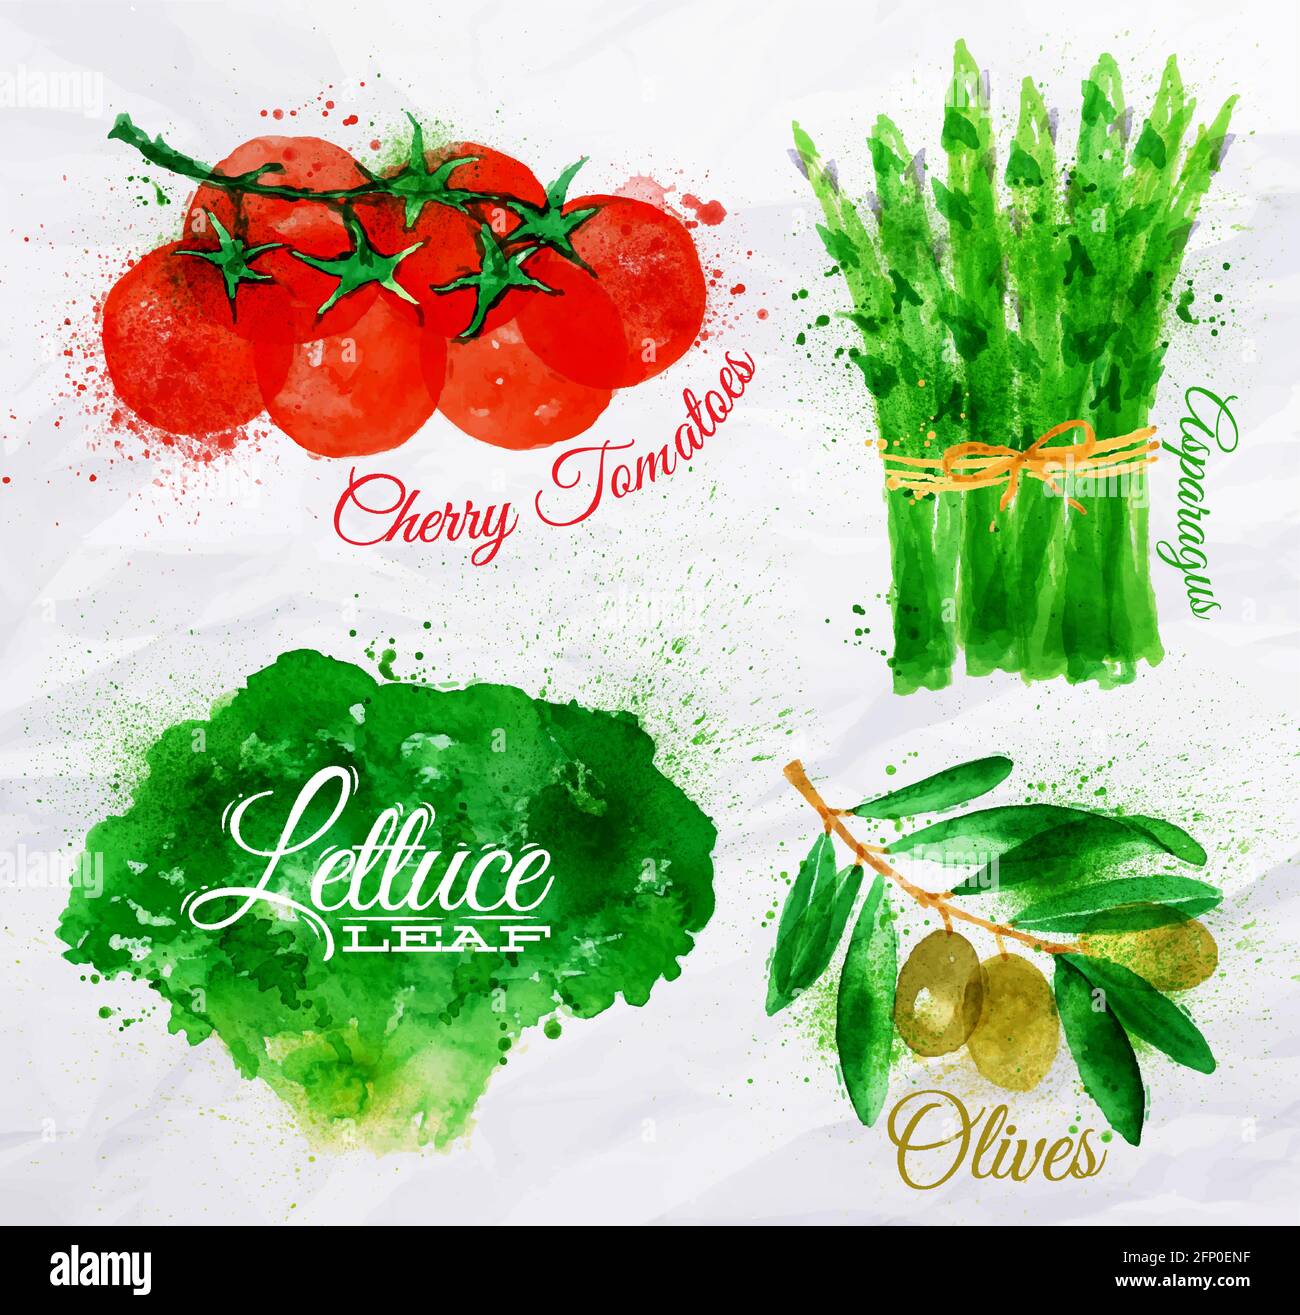 Vegetables set drawn watercolor blots and stains with a spray lettuce, cherry tomatoes, asparagus, olives Stock Vector